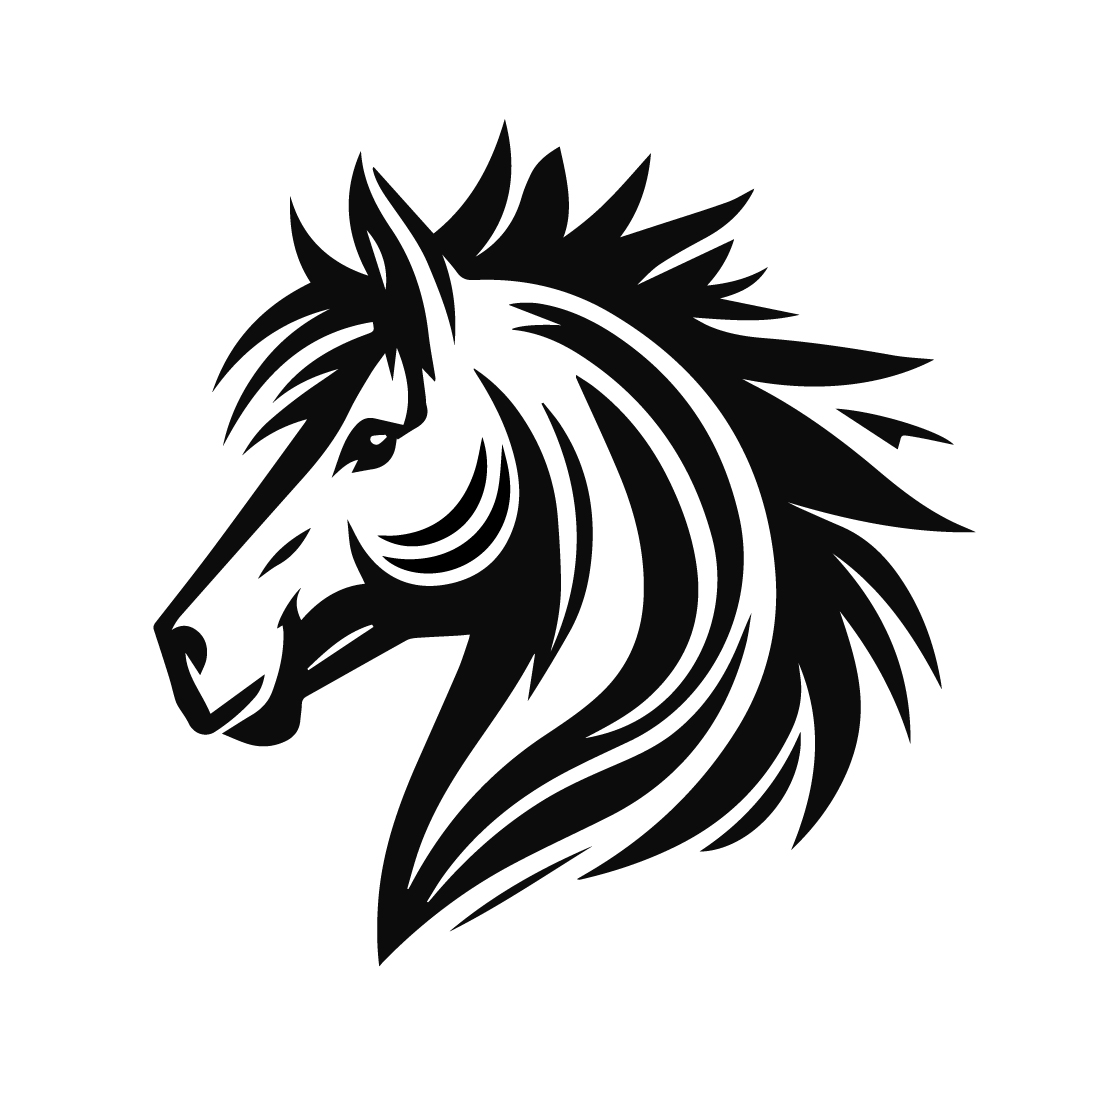 Horse Illustration Vector Clipart cover image.